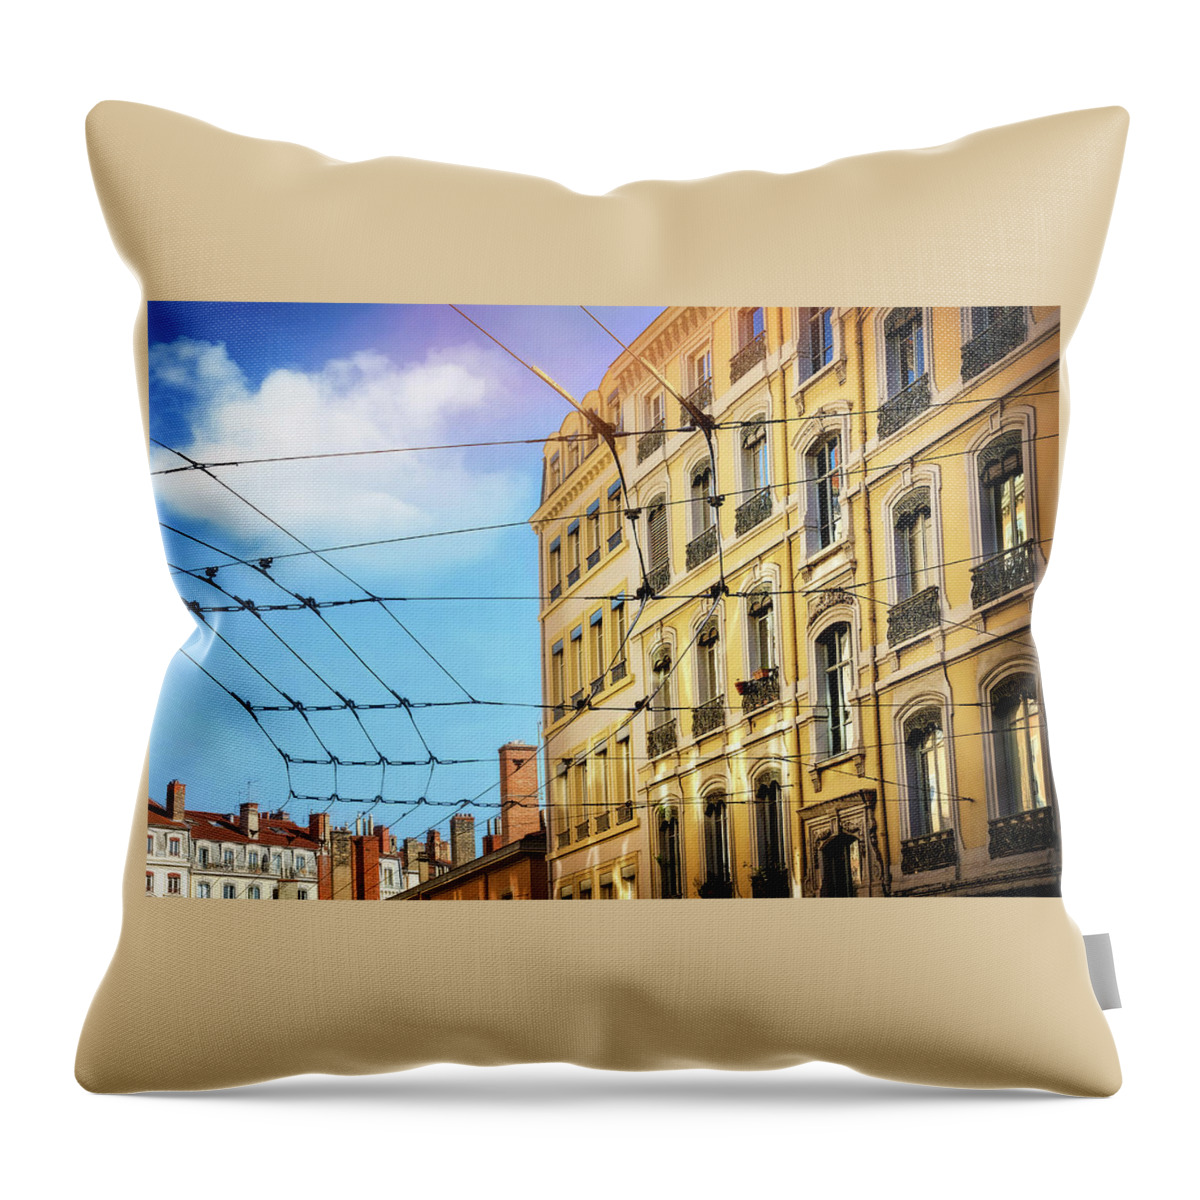 Lyon Throw Pillow featuring the photograph Lyon France Through a Web of Tram Lines by Carol Japp